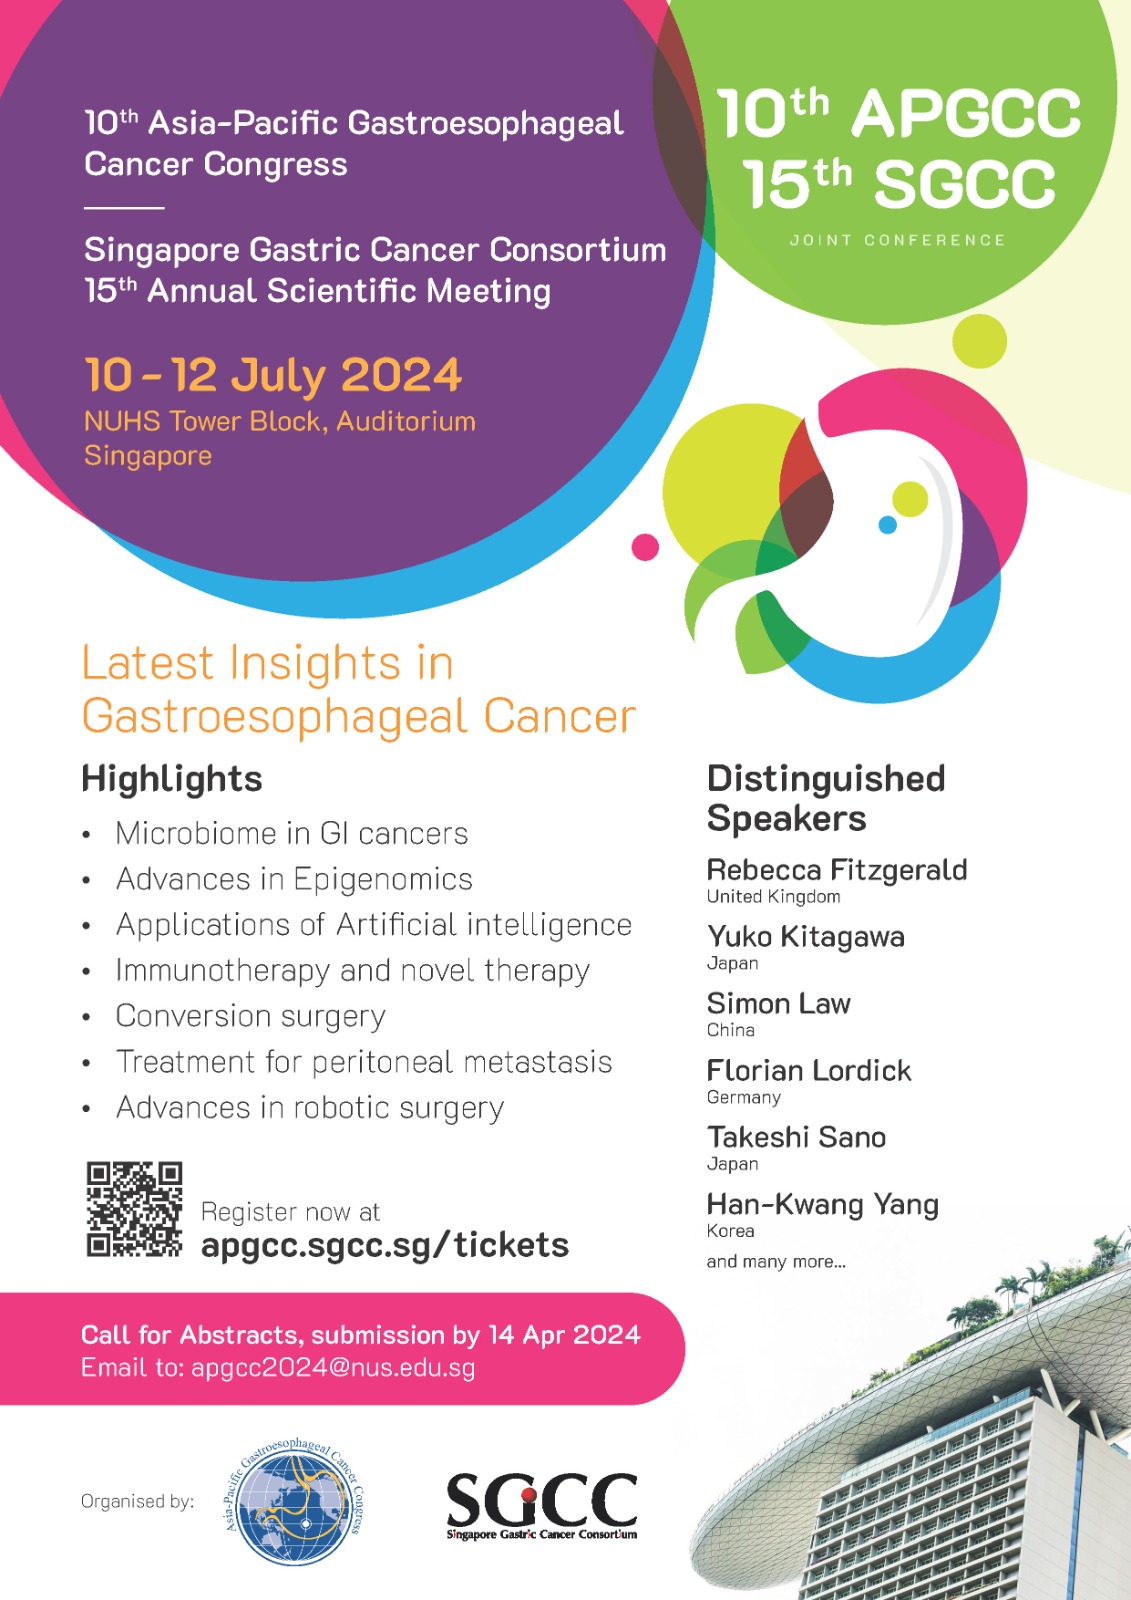 Asia-Pacific Gastroesophageal Cancer Congress